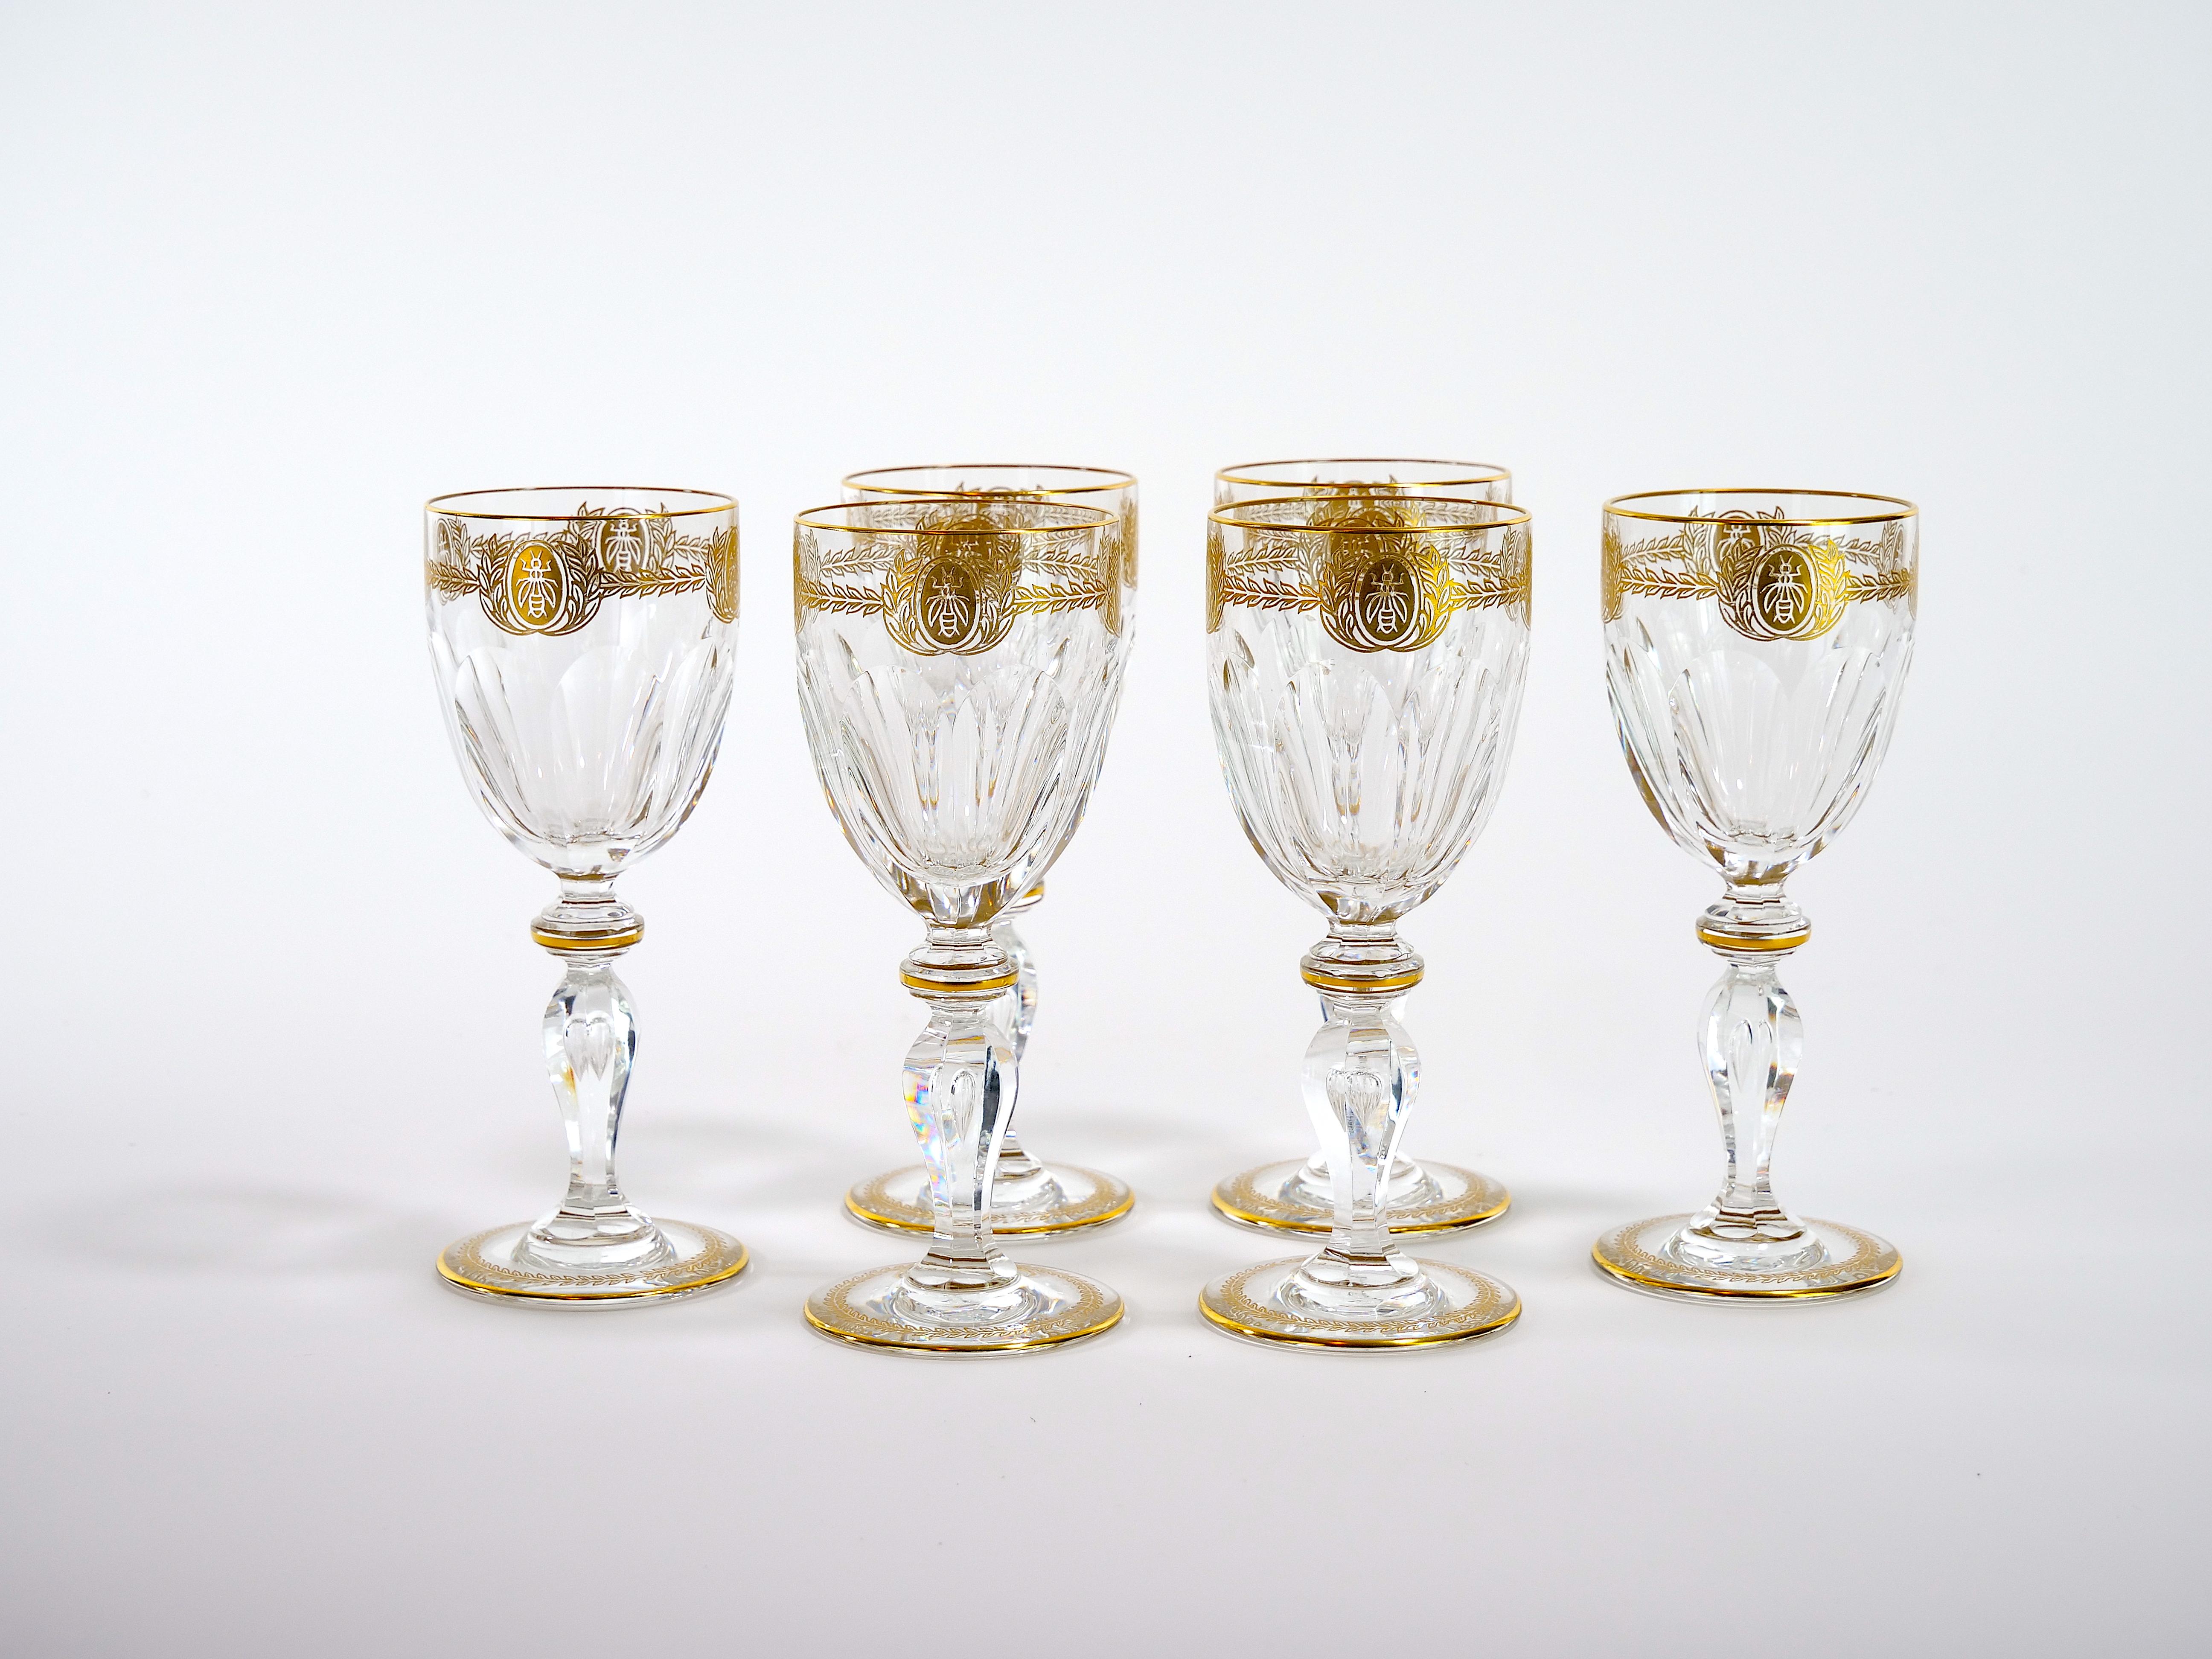 Richly hand cut and mouth blown with hand gilt gold bees design top details and stem garland wreath design barware and tableware glass service for 7 people. Each glass features a deep cuts that allow the light to retract and shine to a brilliant